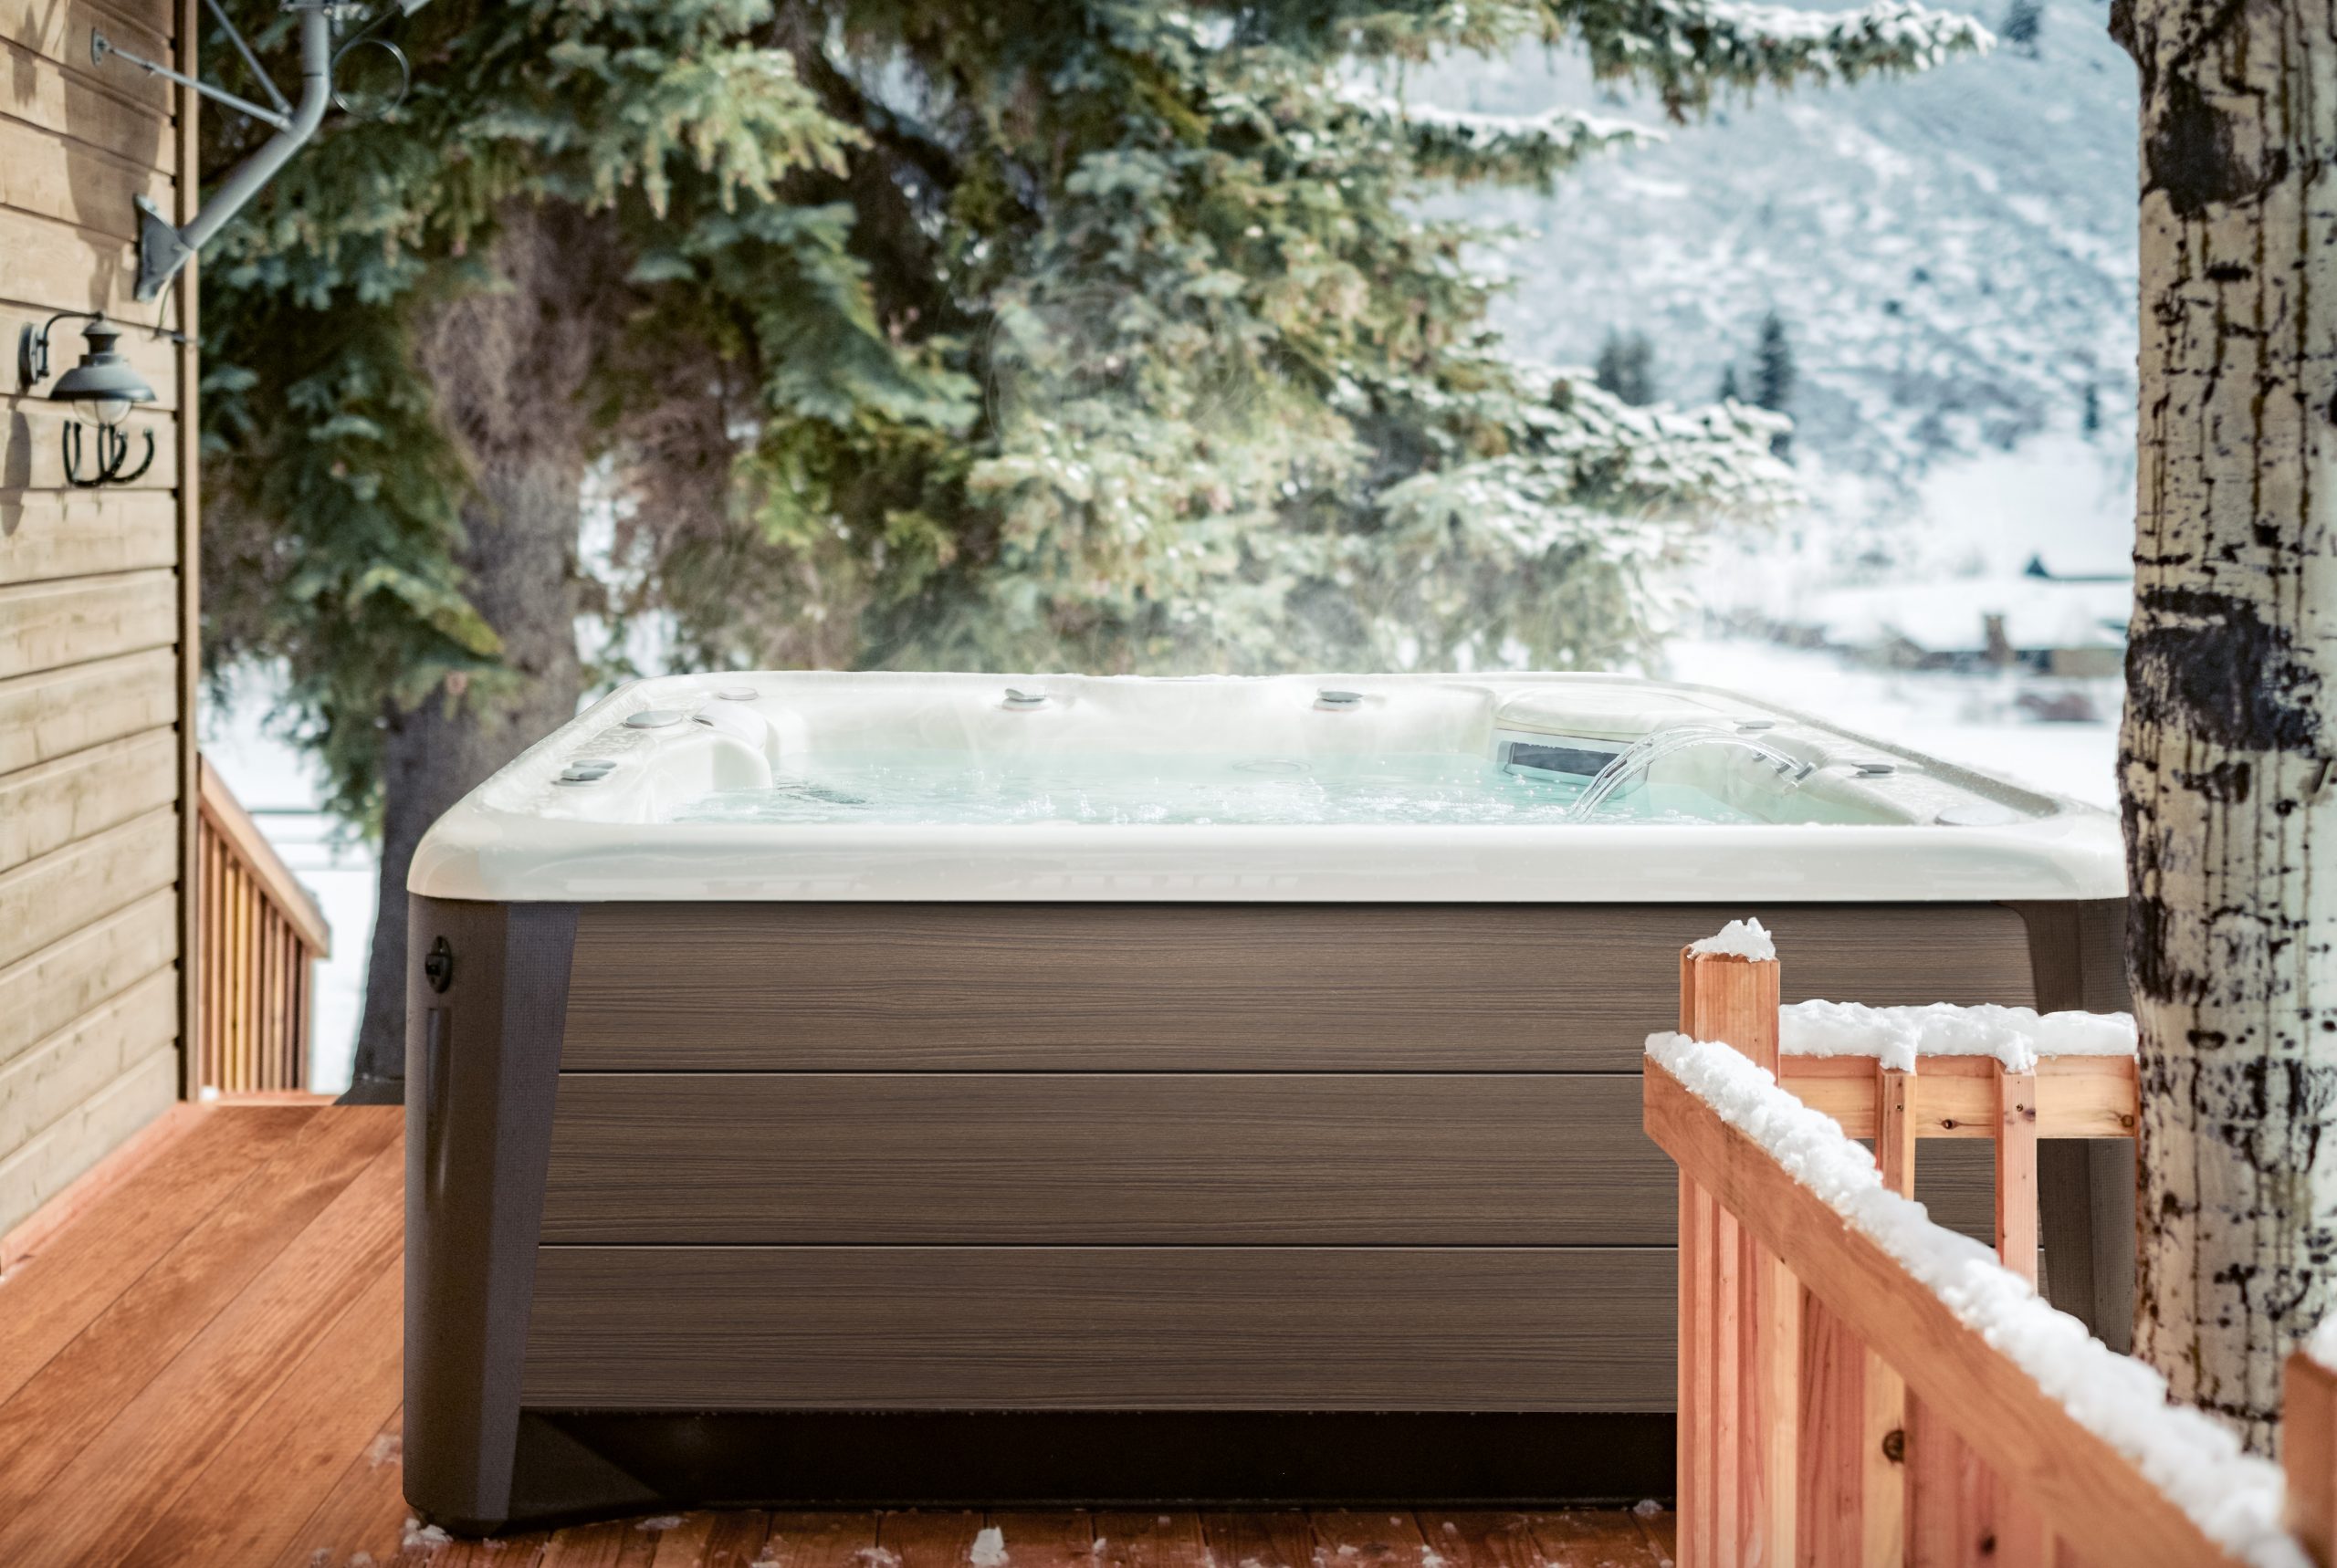 How To Beat The Winter Blues With A Hot Tub